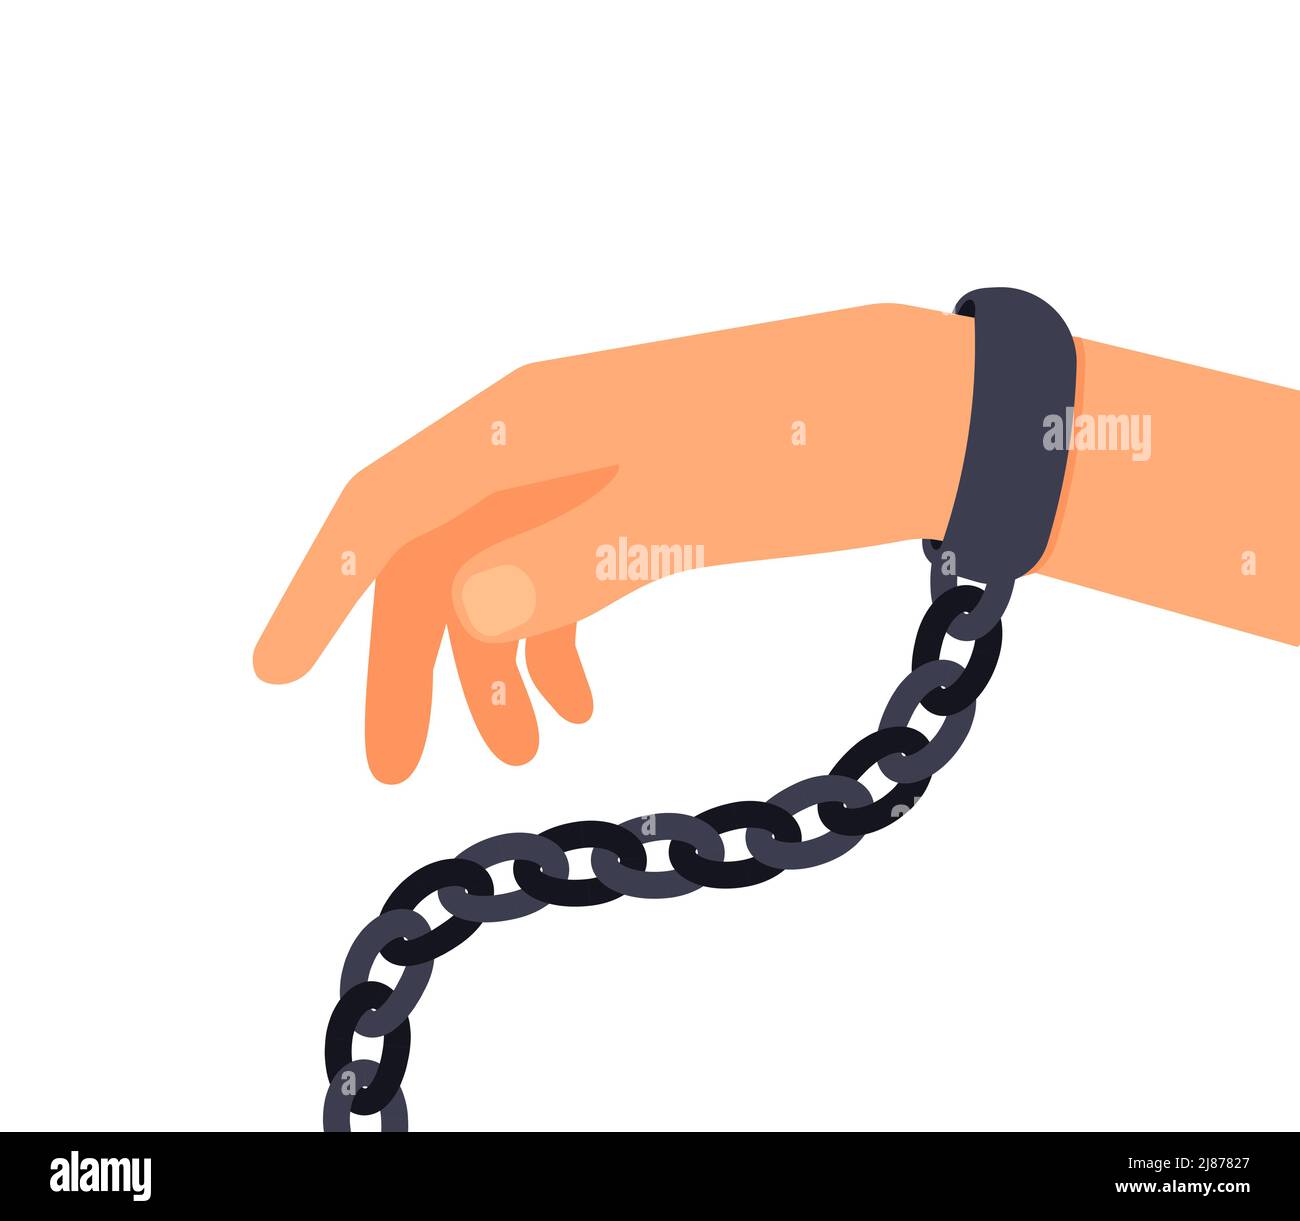 Man's hand in chains. Addiction. concept against violence. Vector illustration. Eps 10 Stock Vector